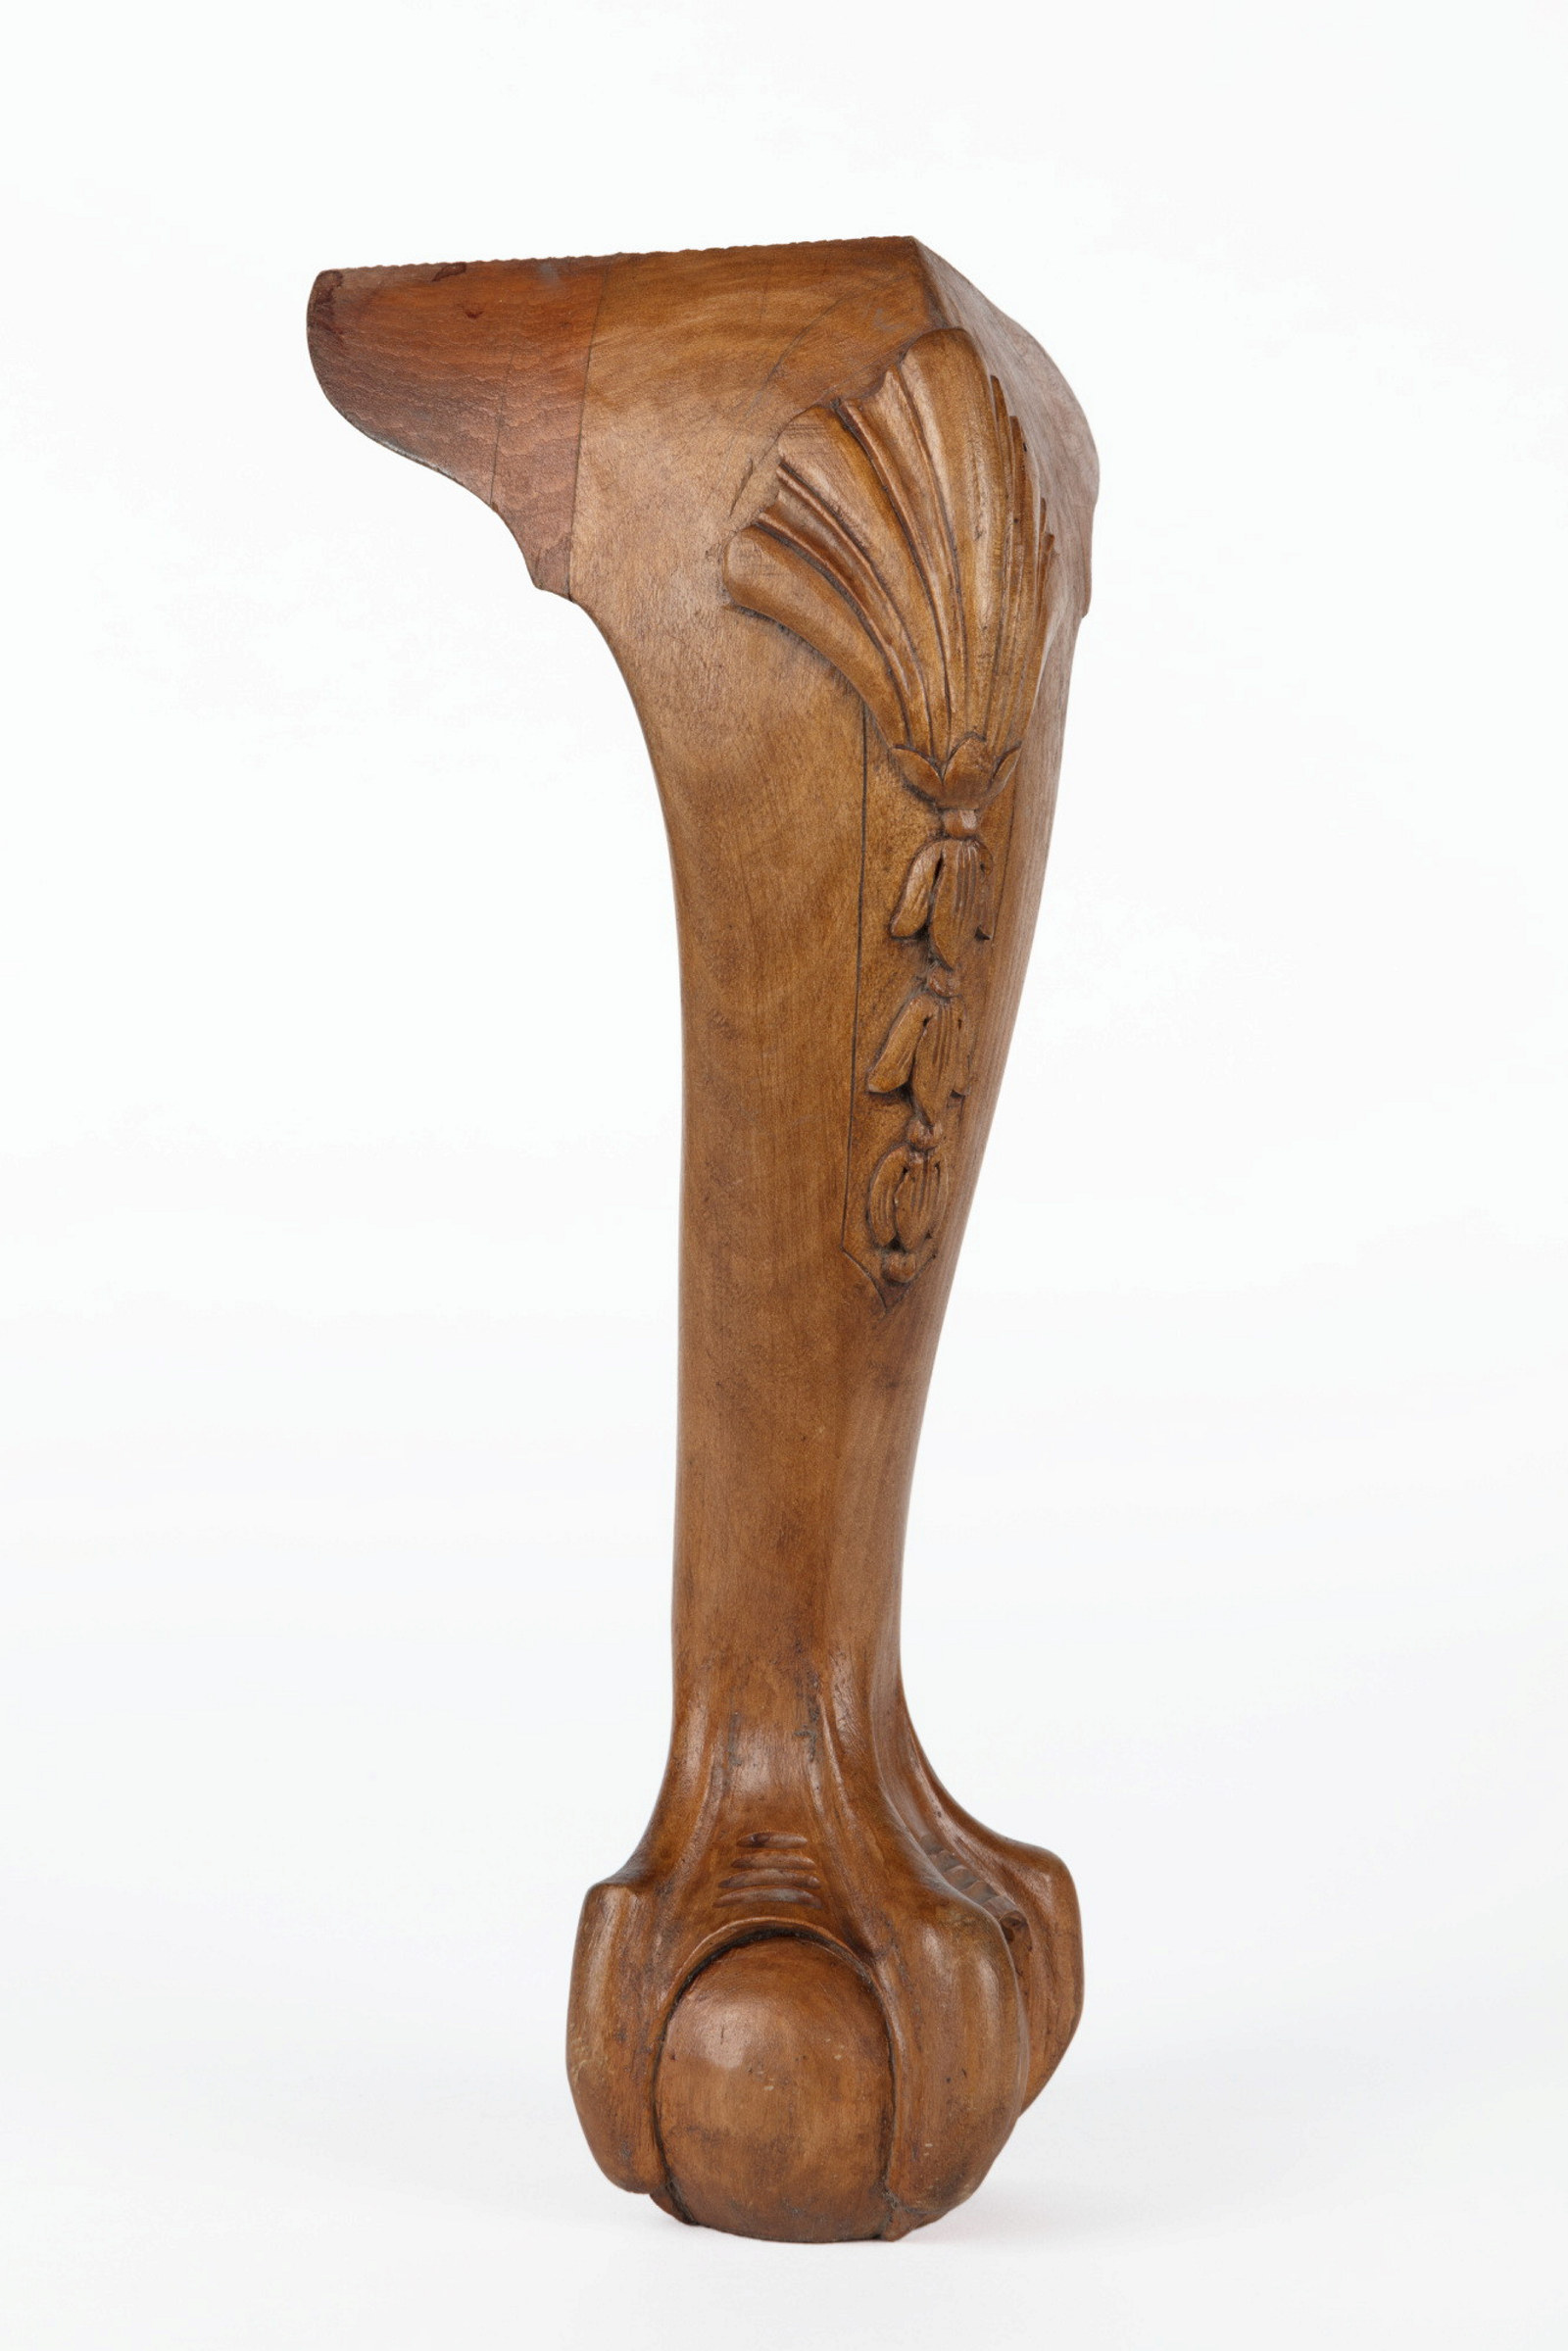 A carved timber furniture leg